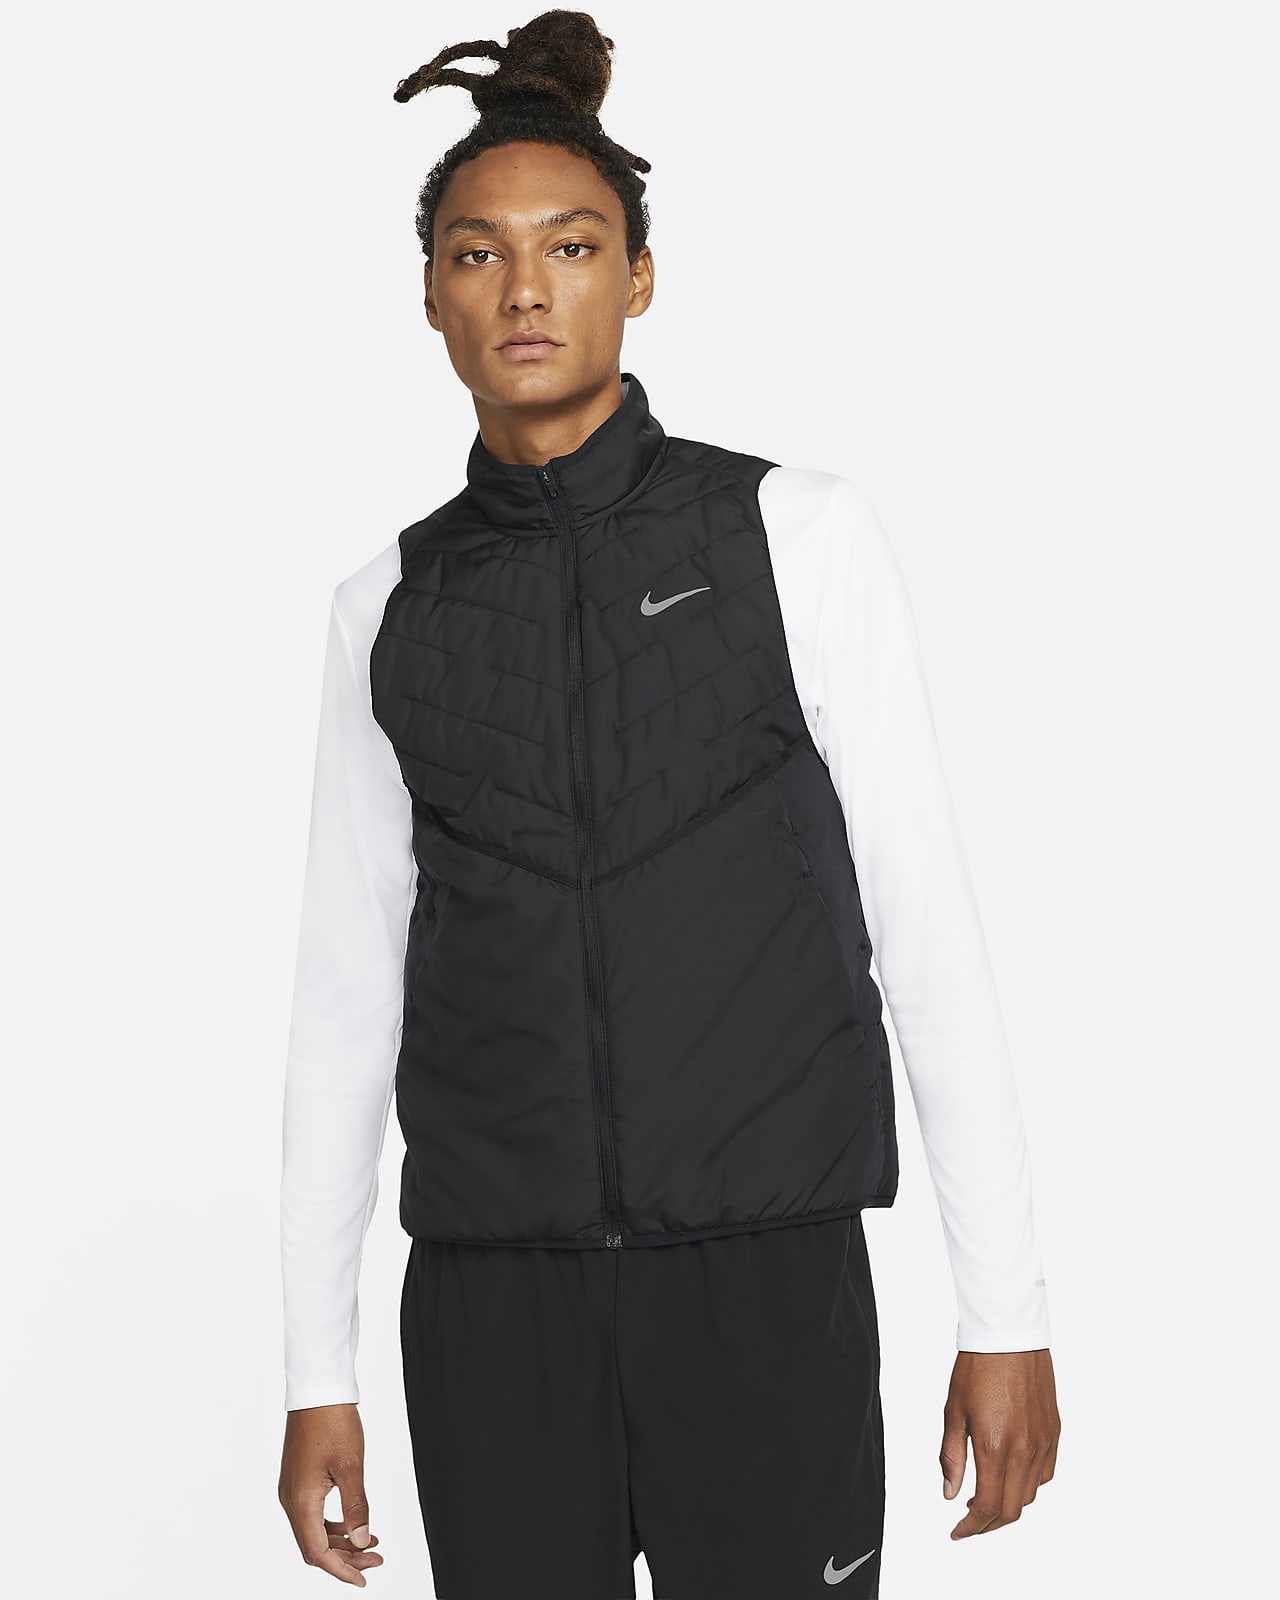 Nike Therma-FIT Repel Herren-Laufweste mit Synthetikfüllung. Nike AT